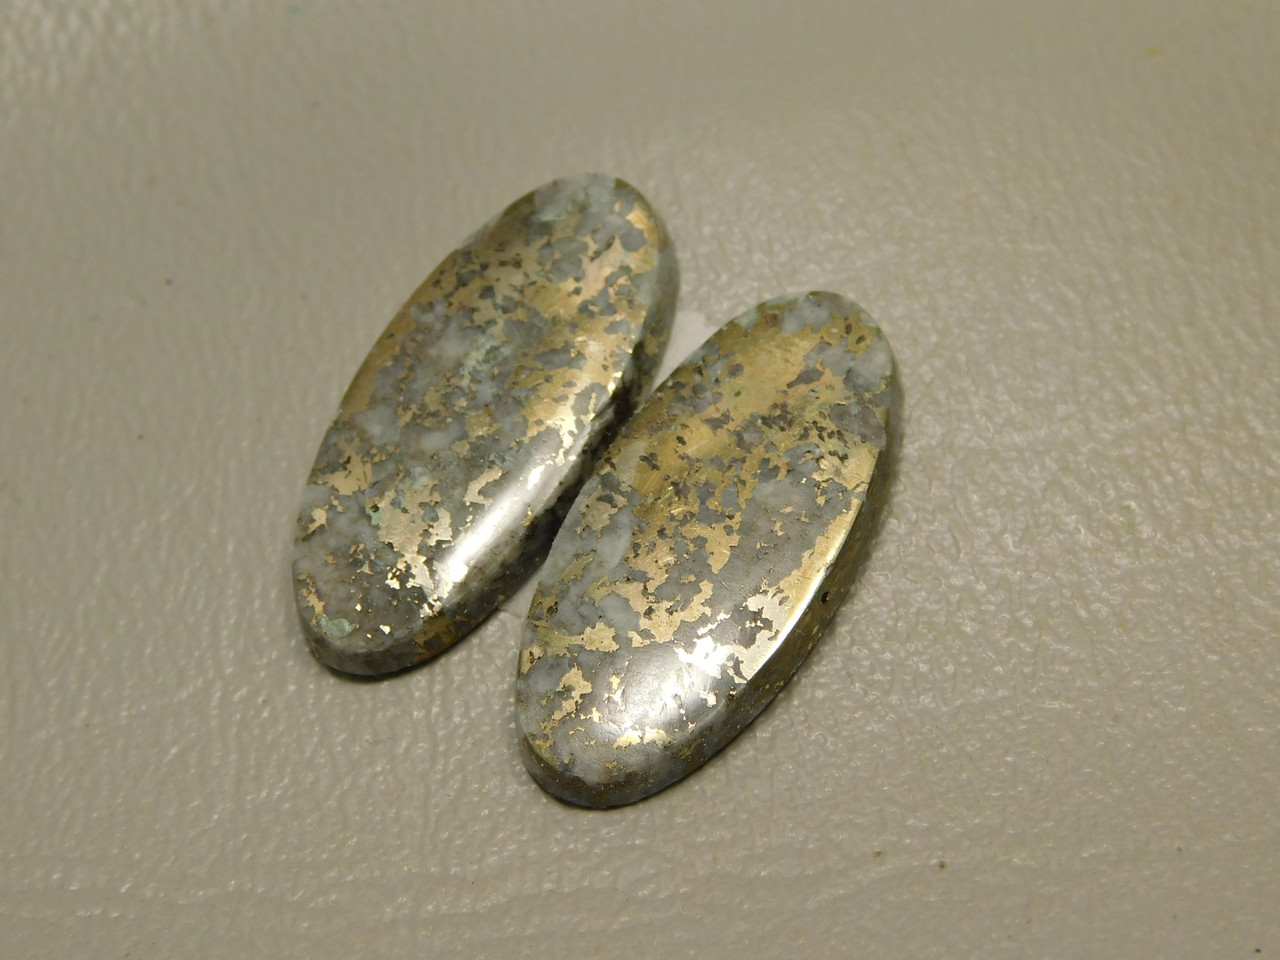 Snowflake Mohawkite Gold Silver Matched Pair Cabochons #18